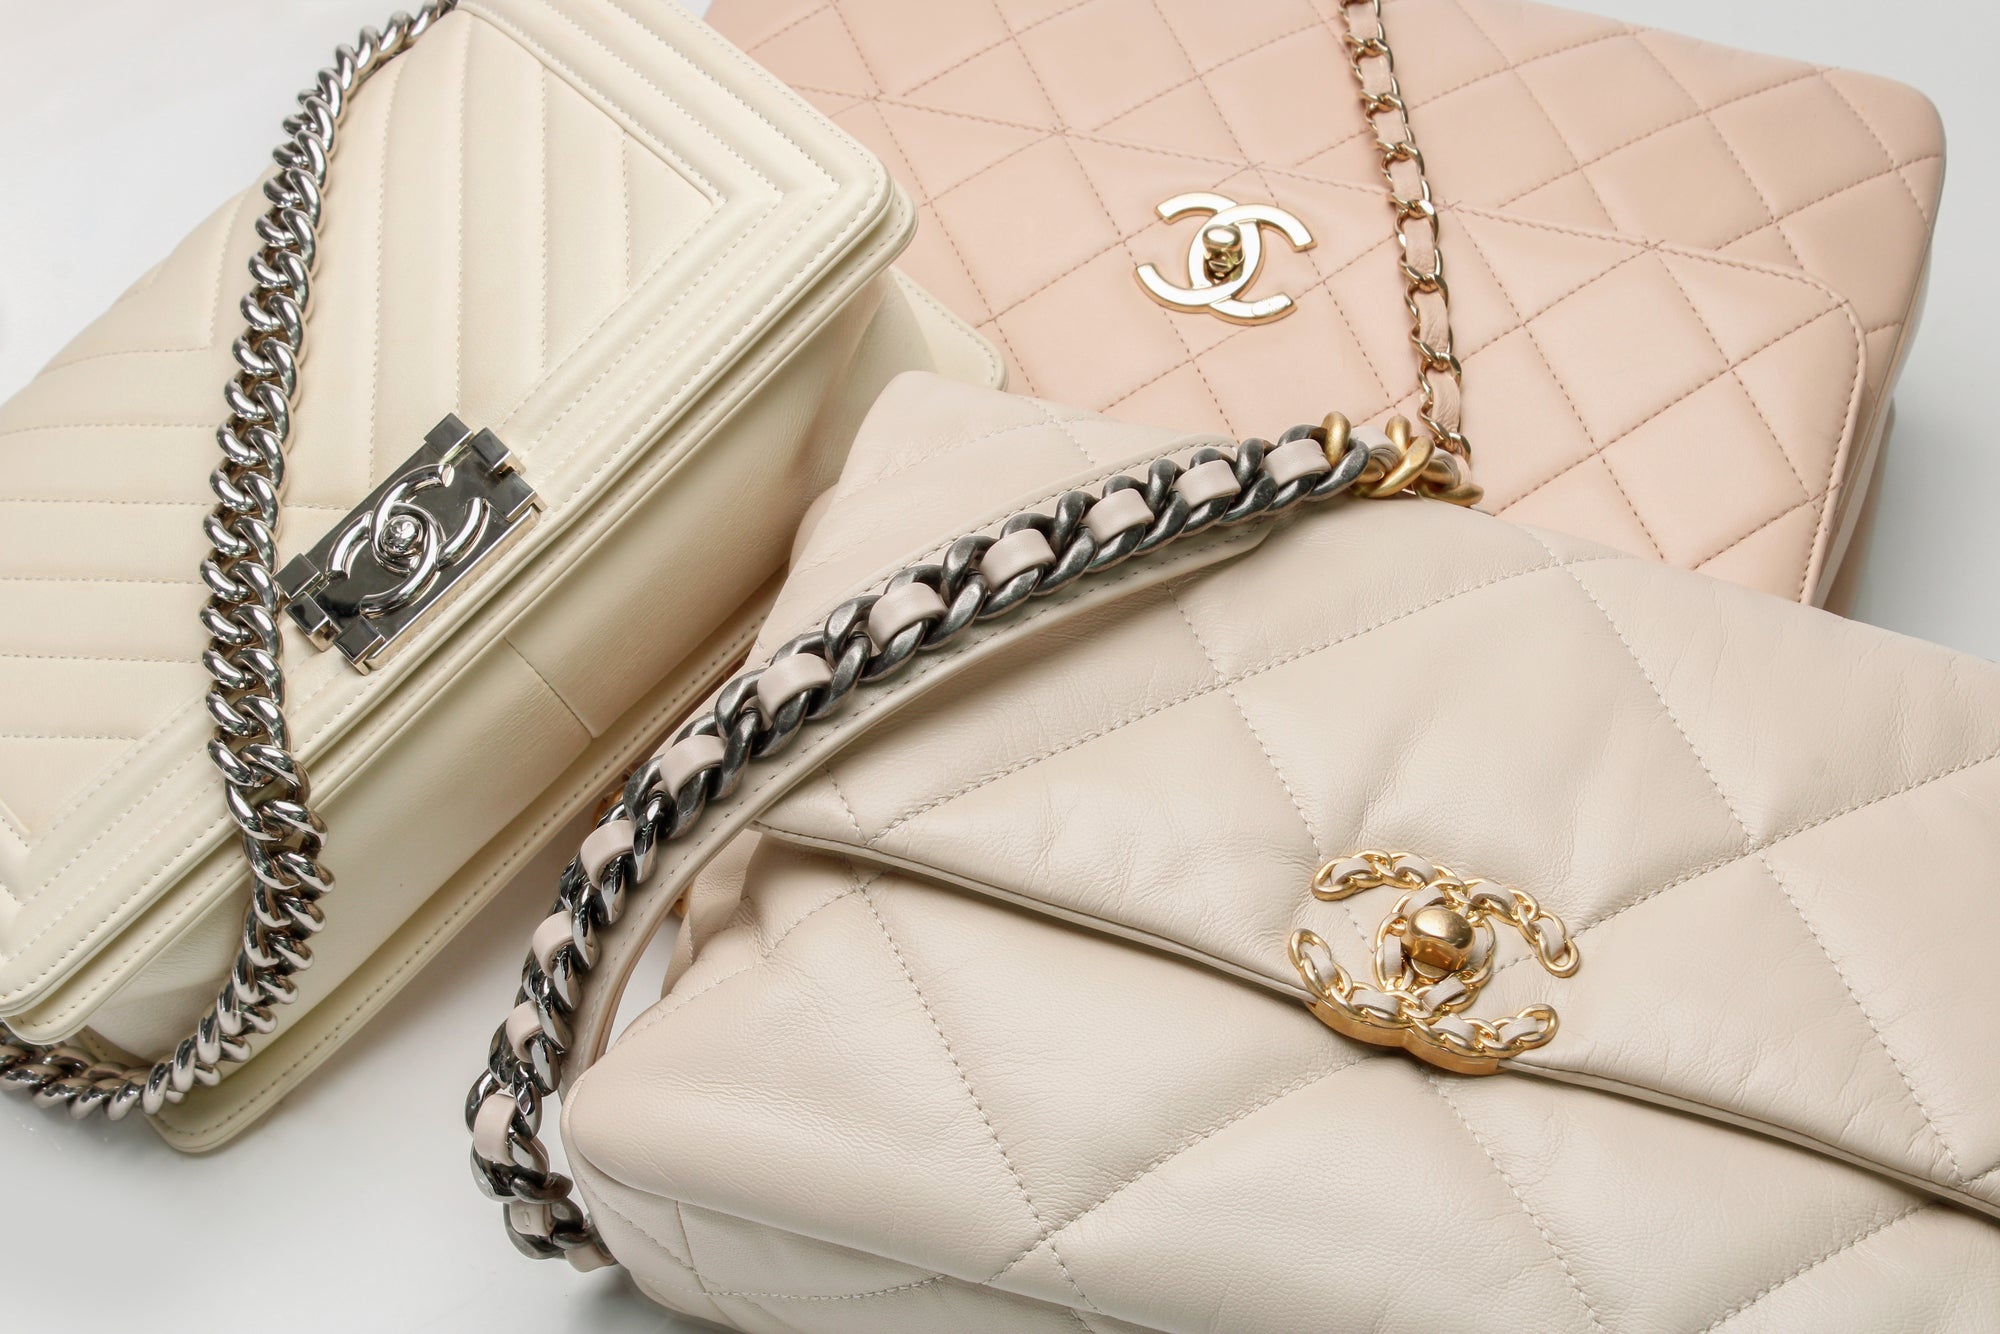 chanel beige small flap bag